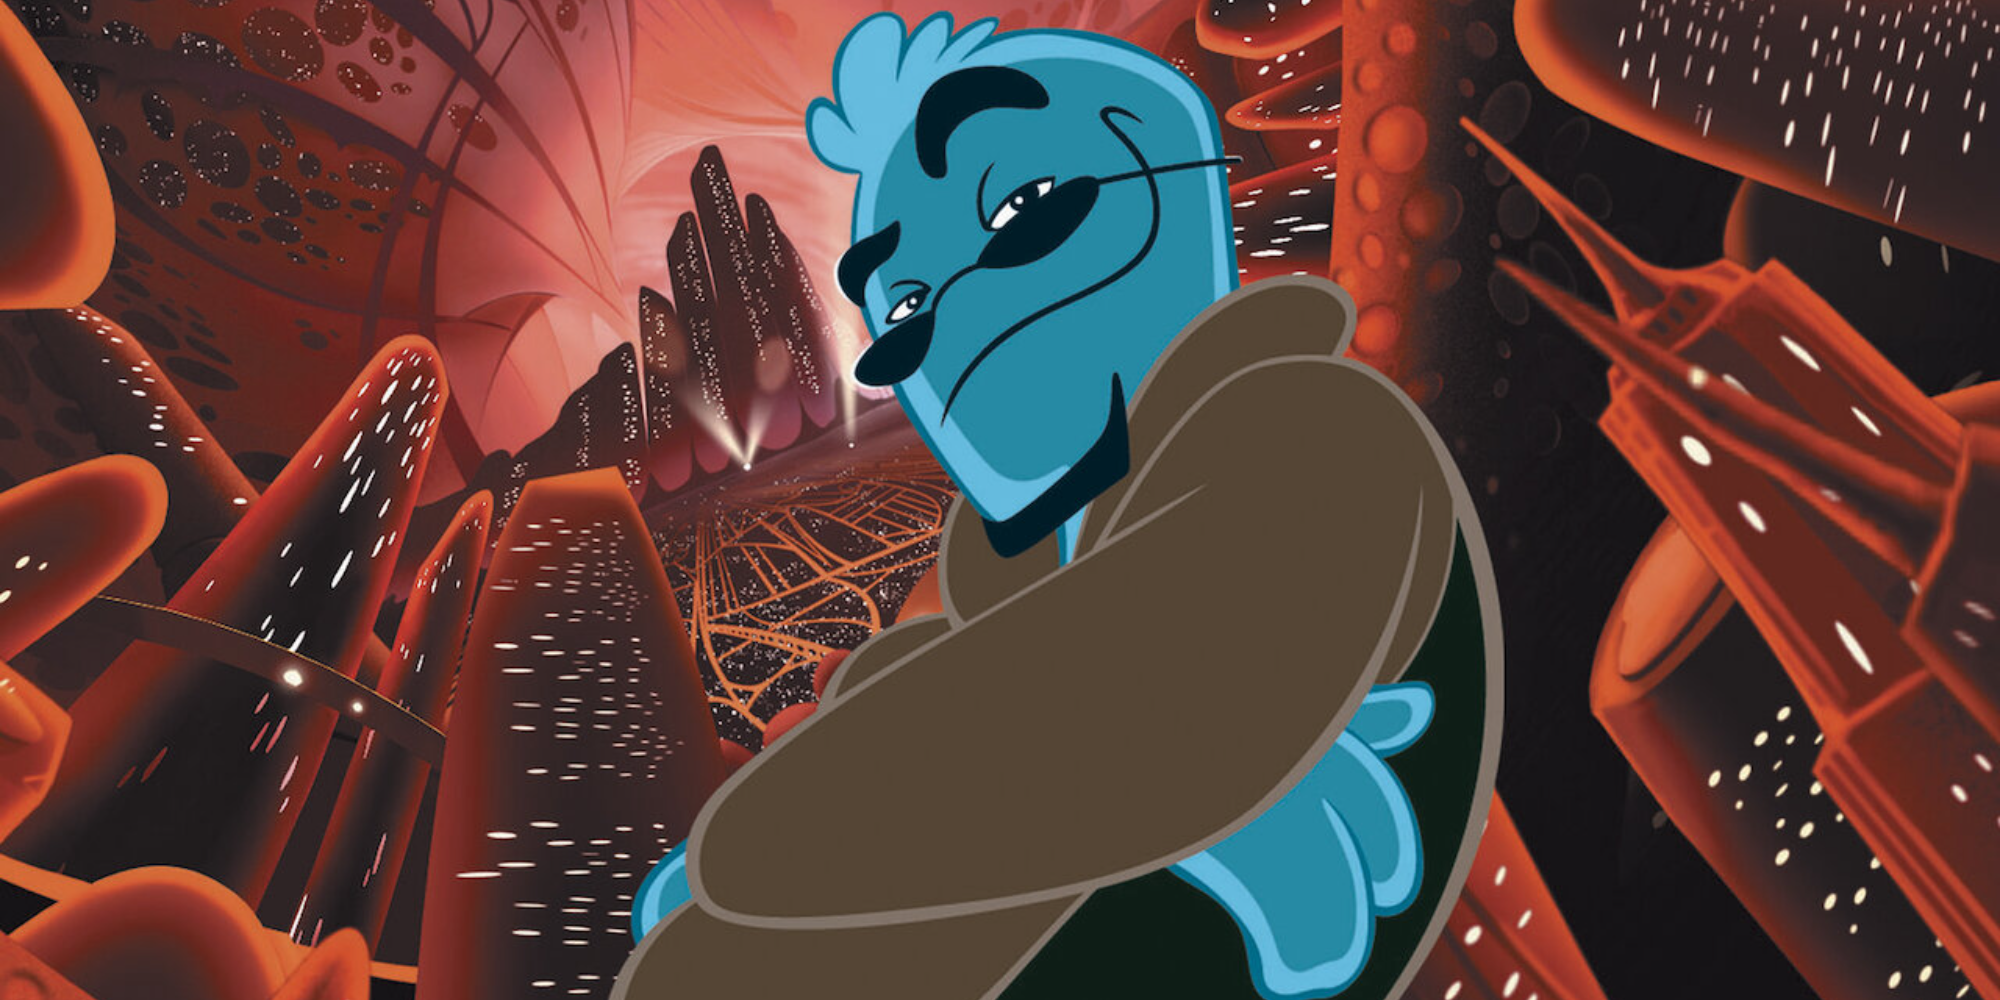 osmosis jones poses in front of the city behind him